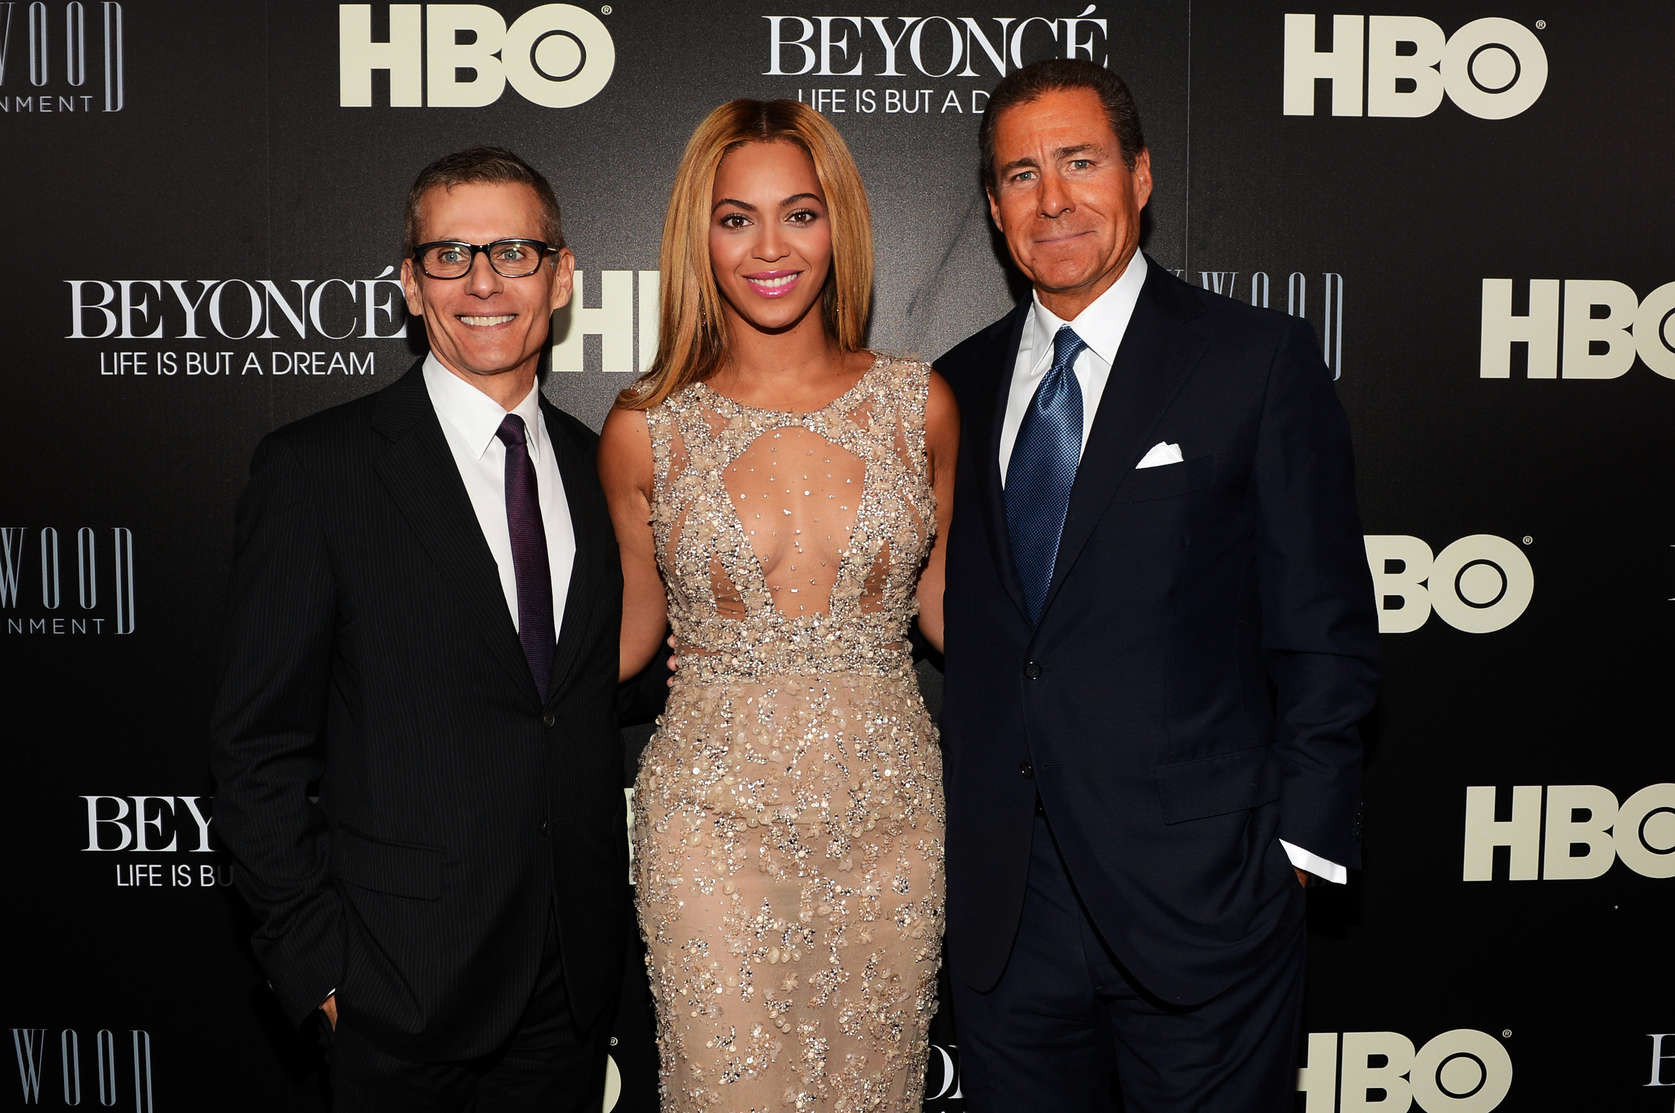 Beyonce Knowles wearing a partially see through dress at 'Beyonce: Life Is But A #75240908